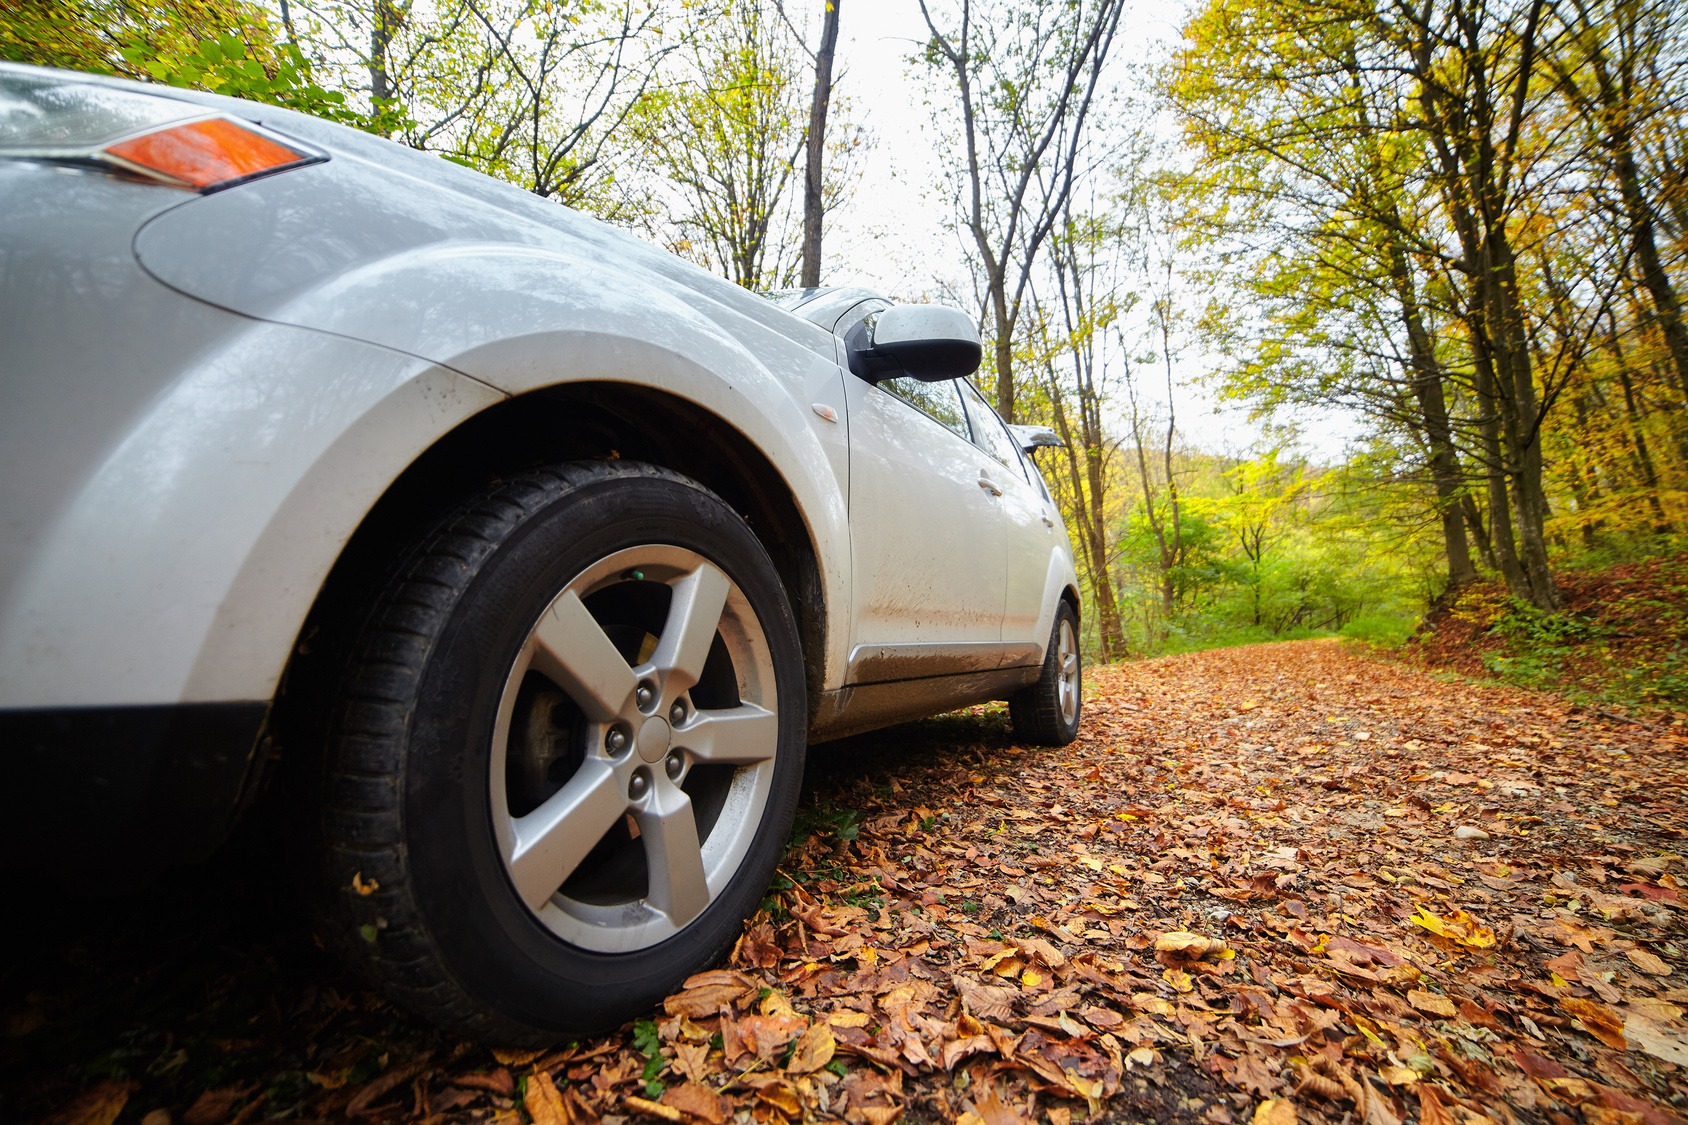 Timber Trouble: Protecting Your Car From Falling Limbs